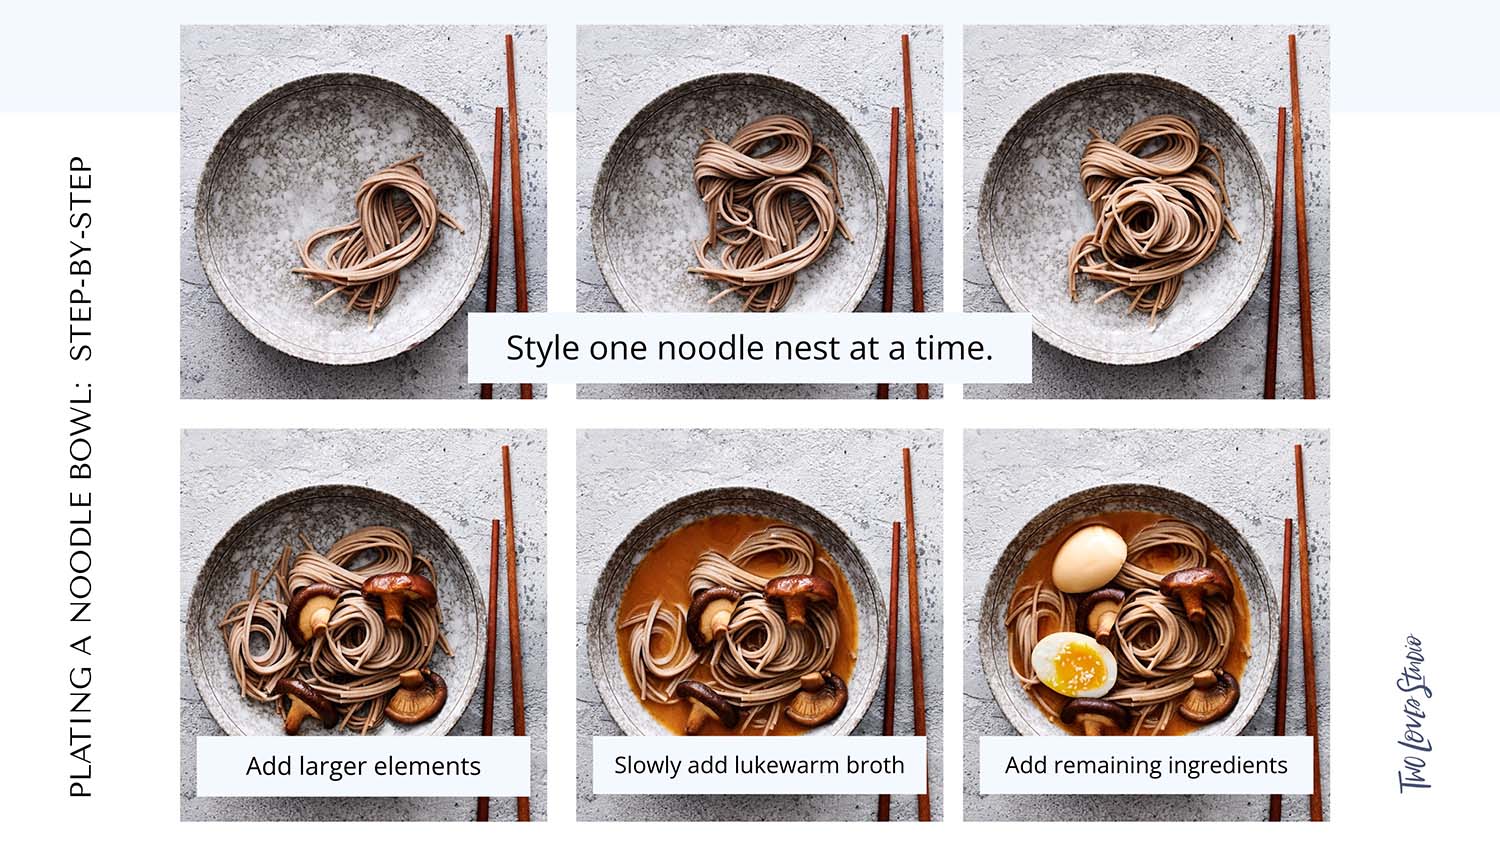 6 images of a noodle soup with eggs and shiitake mushrooms presented in a step-by-step image process of how to build create noodle food styling